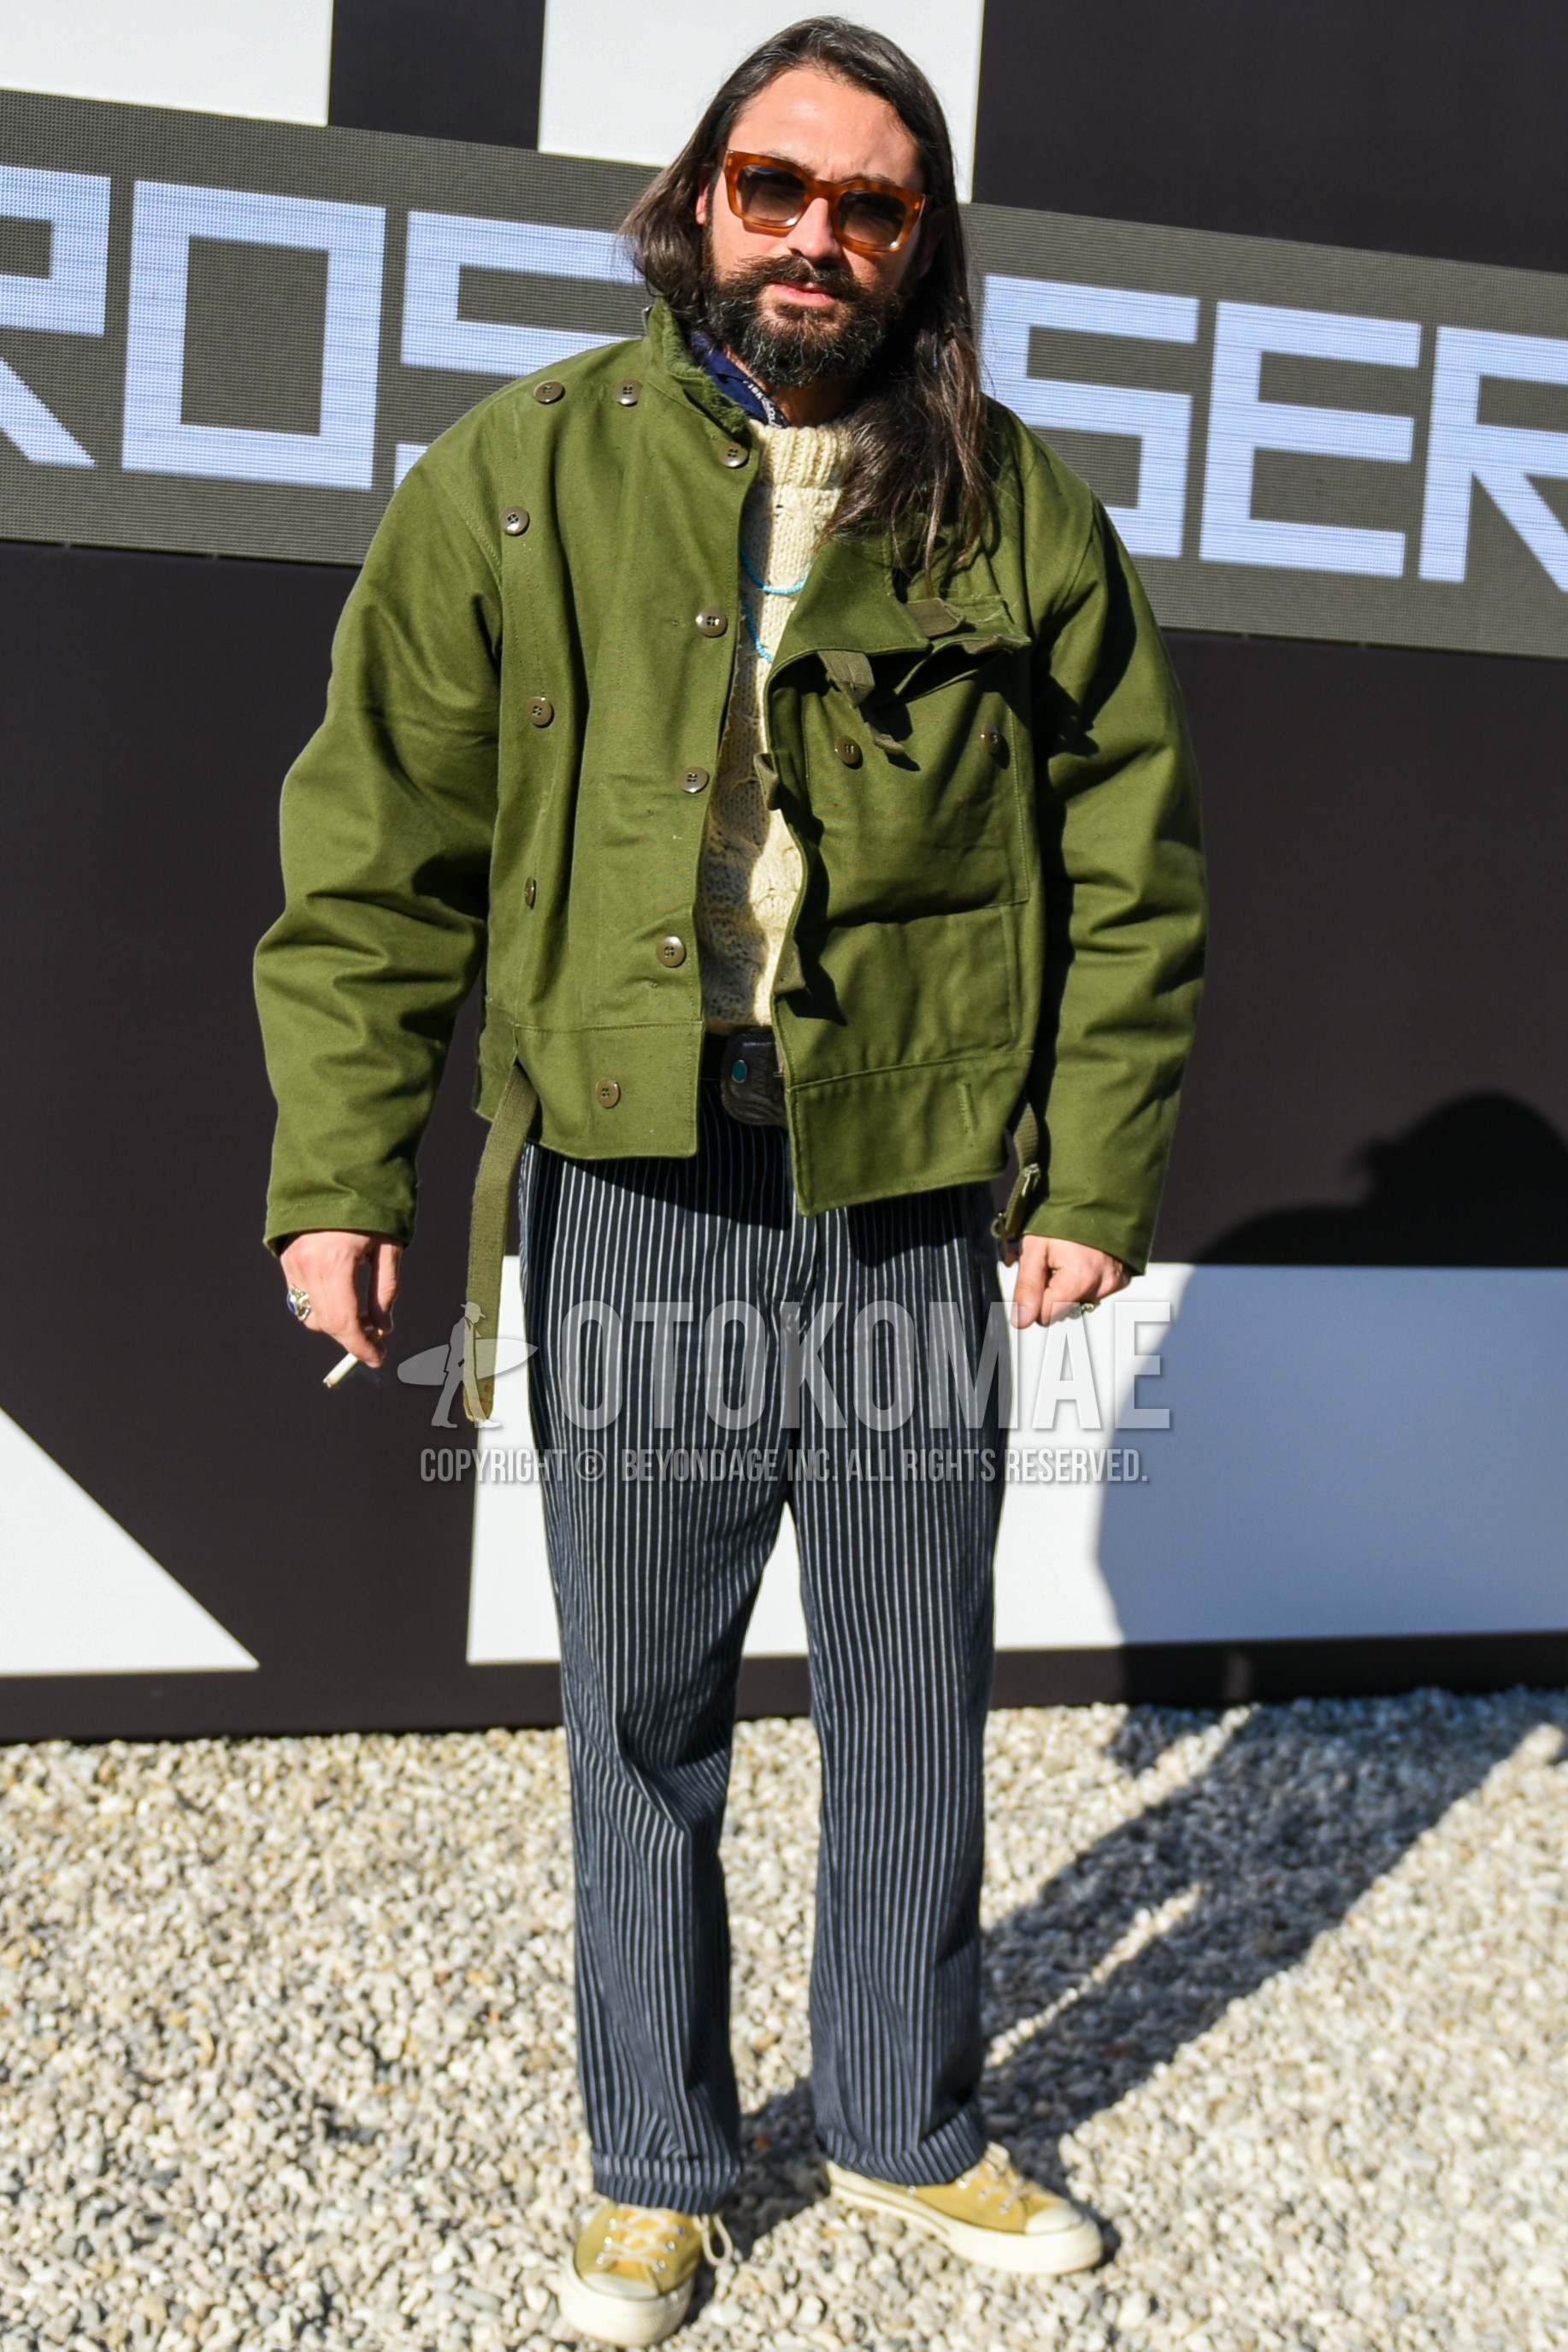 Men's autumn winter outfit with brown tortoiseshell sunglasses, olive green plain field jacket/hunting jacket, white plain sweater, navy stripes slacks, yellow low-cut sneakers.